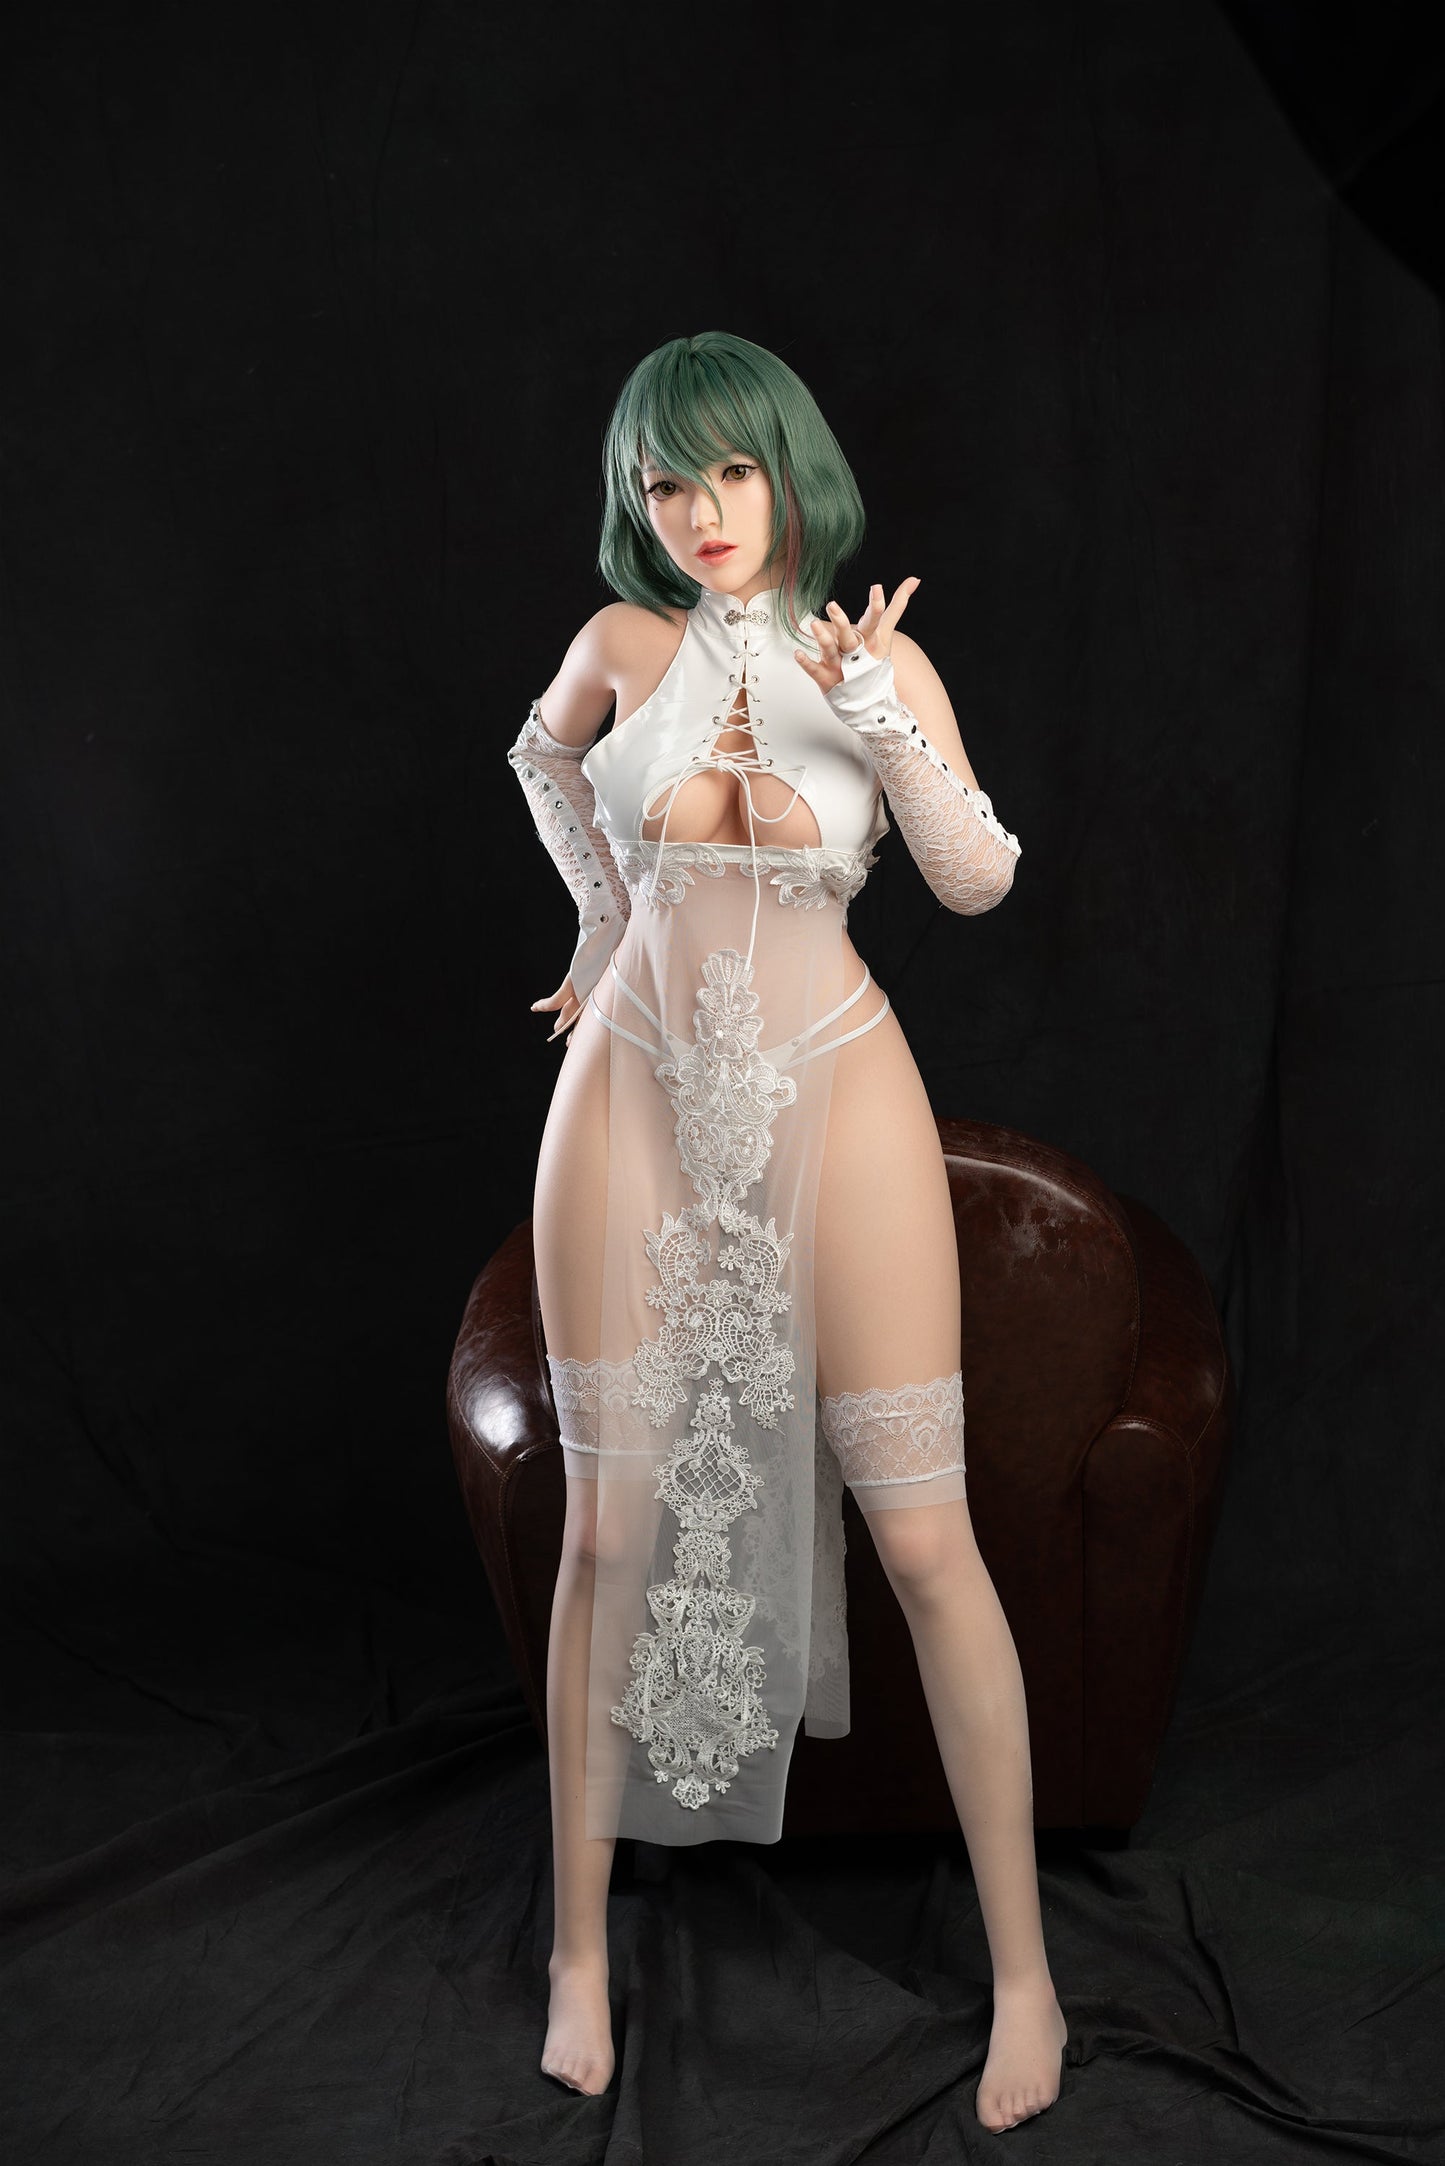 Dylan - Superb amateur Asian Silicone Sex Doll